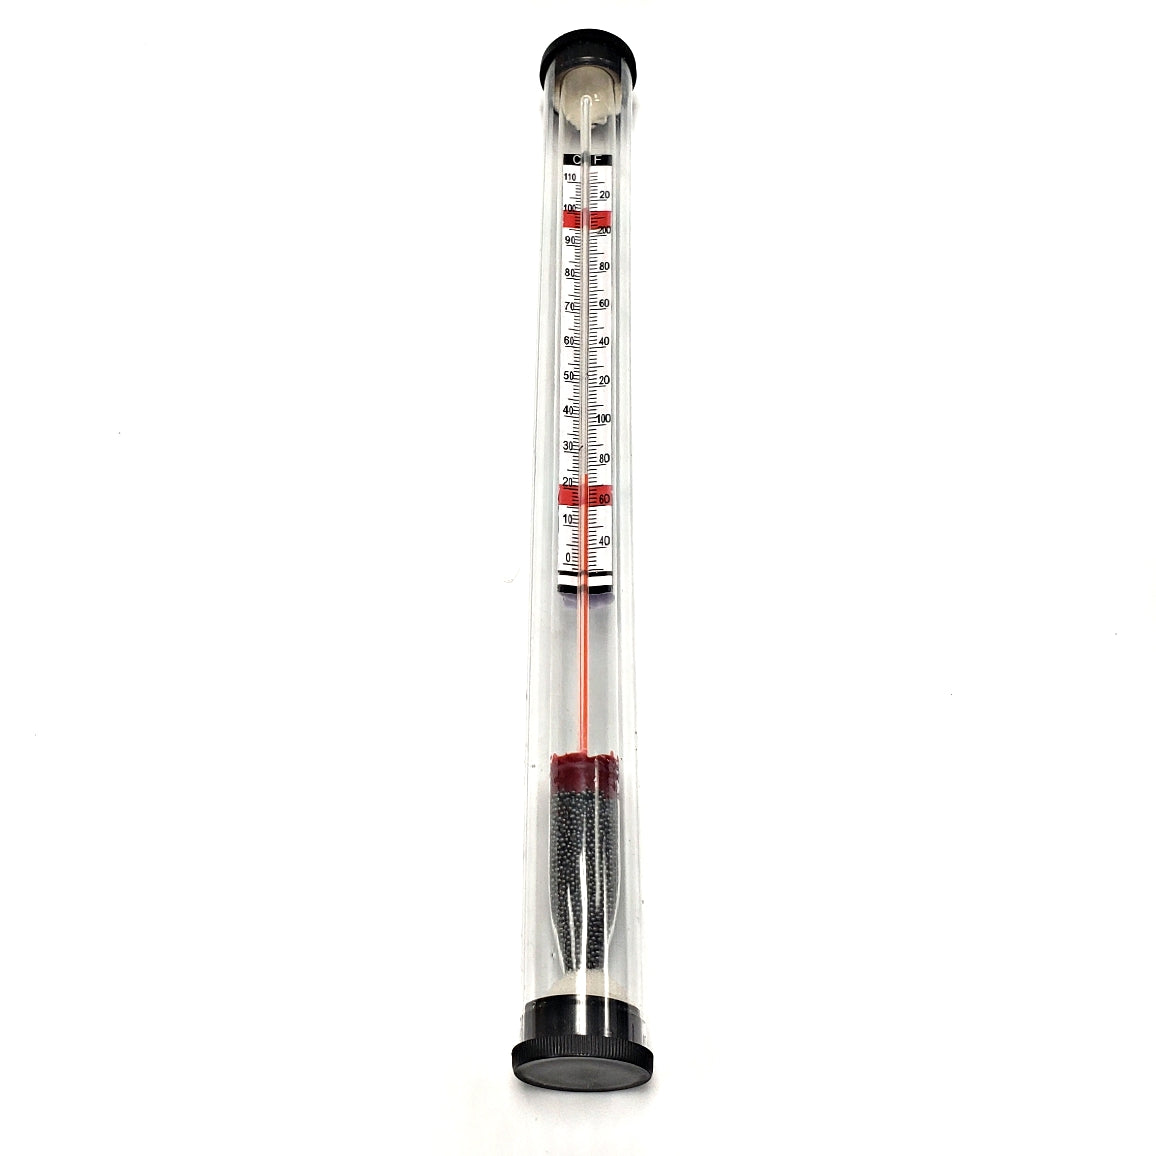 Floating thermometer true brew glass 0F-220F /-20C to105C Beer Wine Moonshine - UproMax